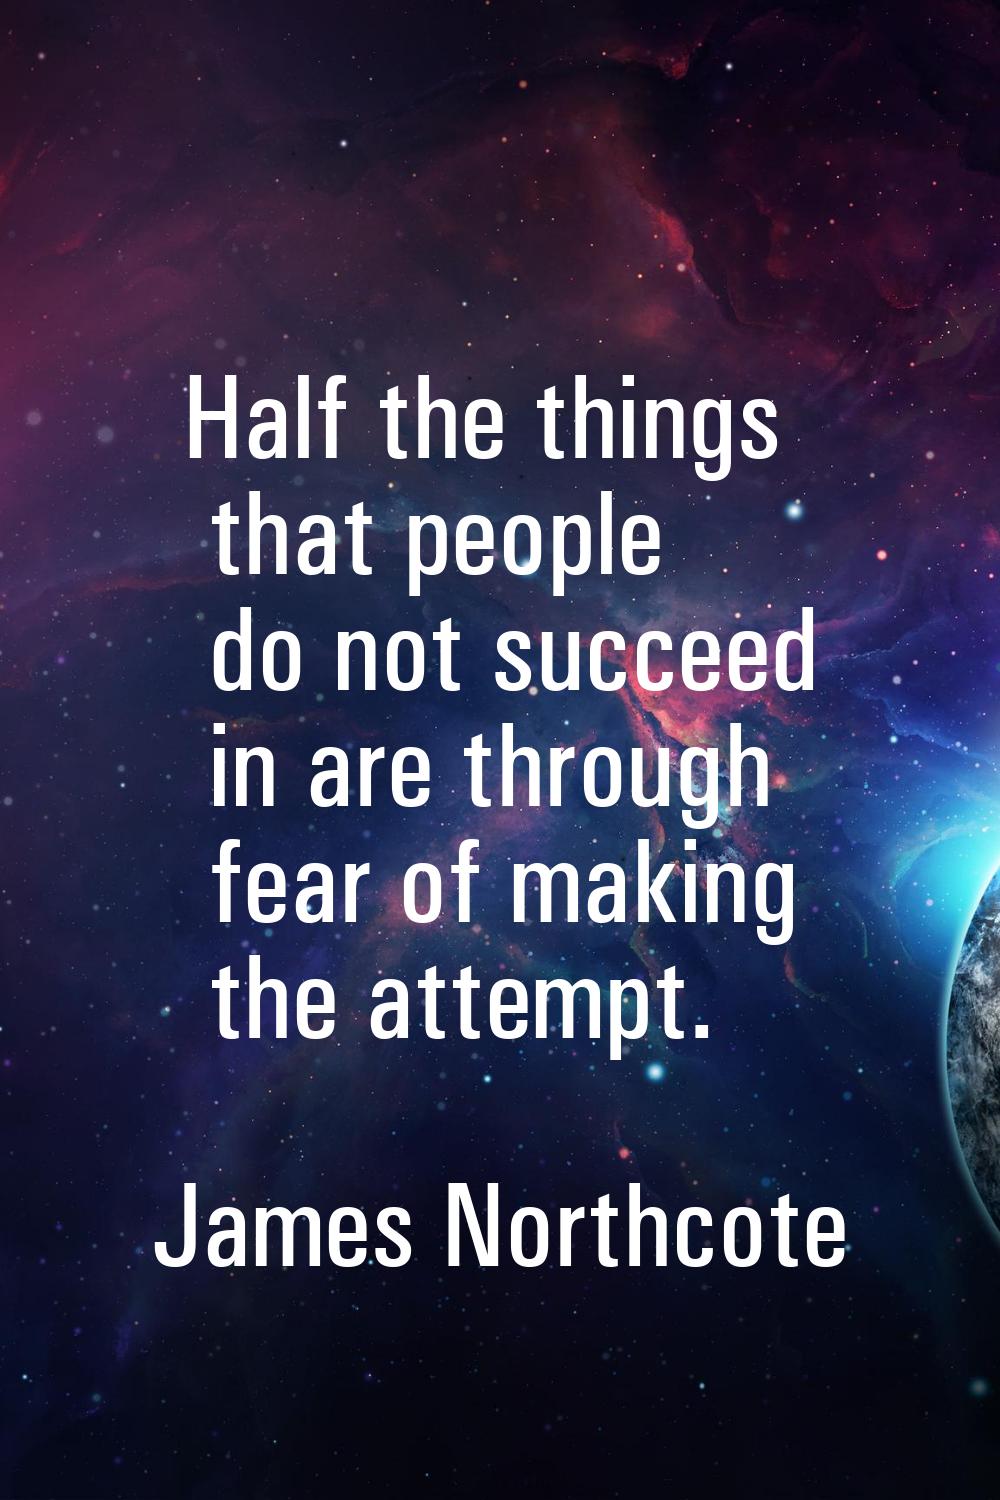 Half the things that people do not succeed in are through fear of making the attempt.